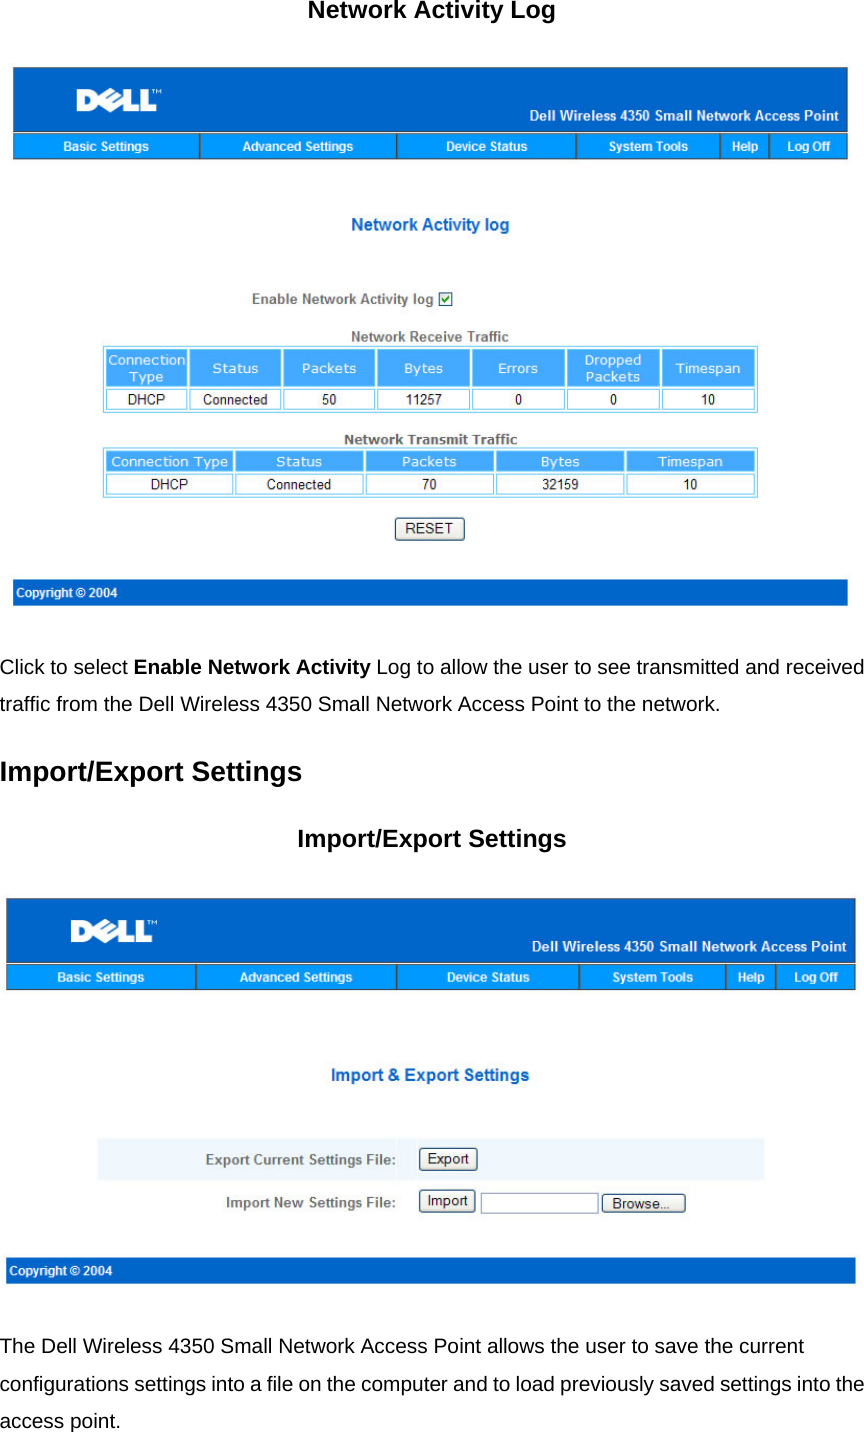 Network Activity Log  Click to select Enable Network Activity Log to allow the user to see transmitted and received traffic from the Dell Wireless 4350 Small Network Access Point to the network. Import/Export Settings Import/Export Settings  The Dell Wireless 4350 Small Network Access Point allows the user to save the current configurations settings into a file on the computer and to load previously saved settings into the access point.   